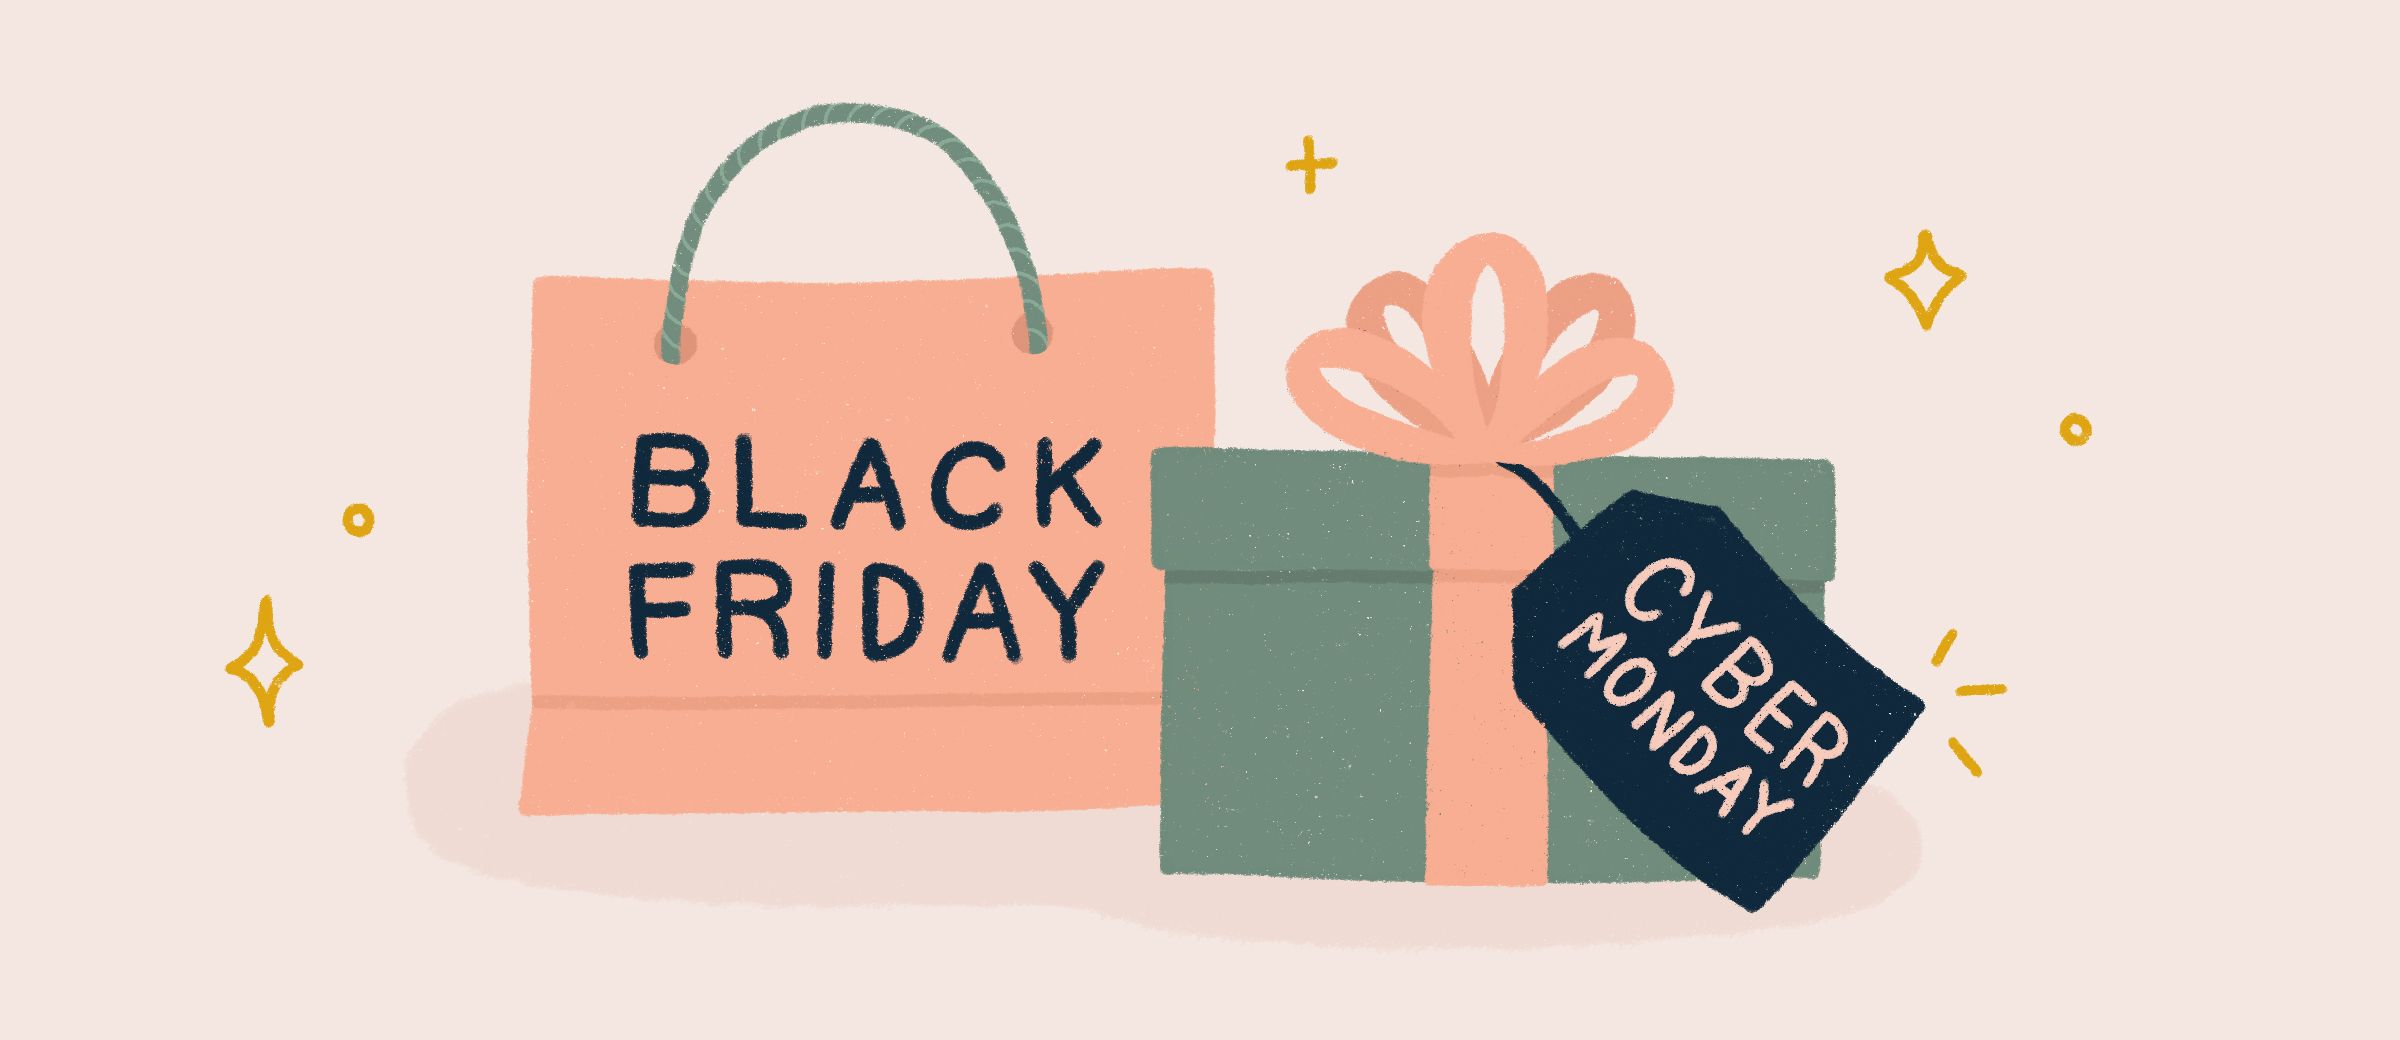 Black Friday & Cyber Monday Guide: Holiday Business Tips, by darren-griffin